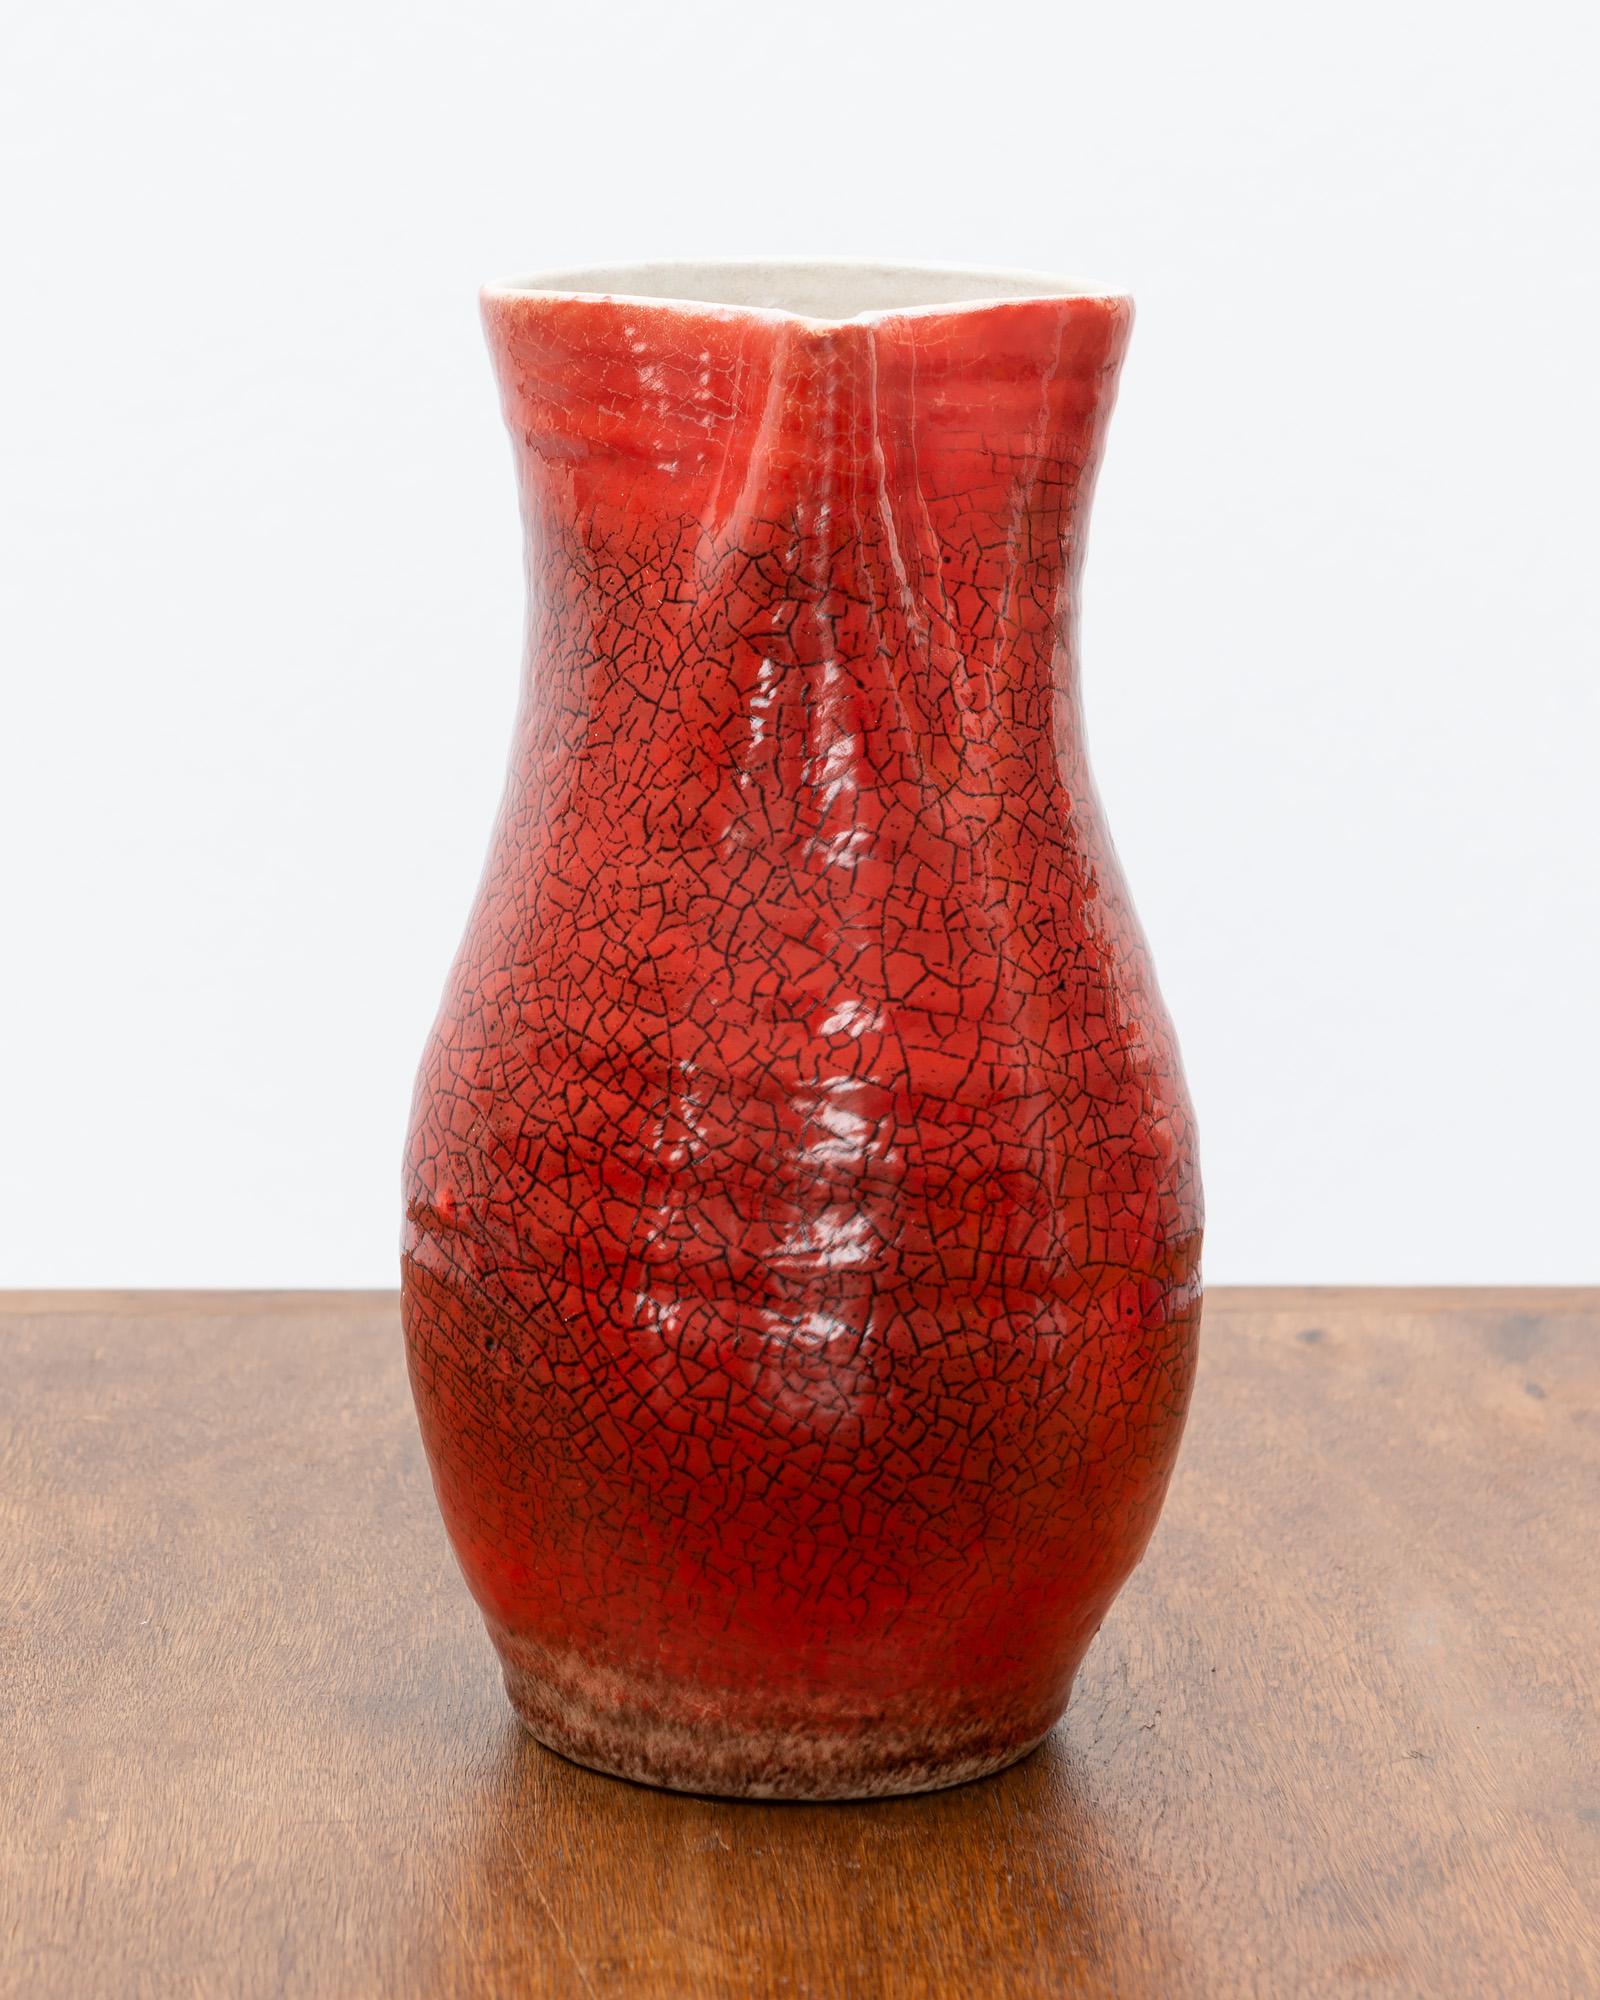 Stunning Accolay pitcher in a Classic French form with a gorgeous red glaze. France, 1950s.